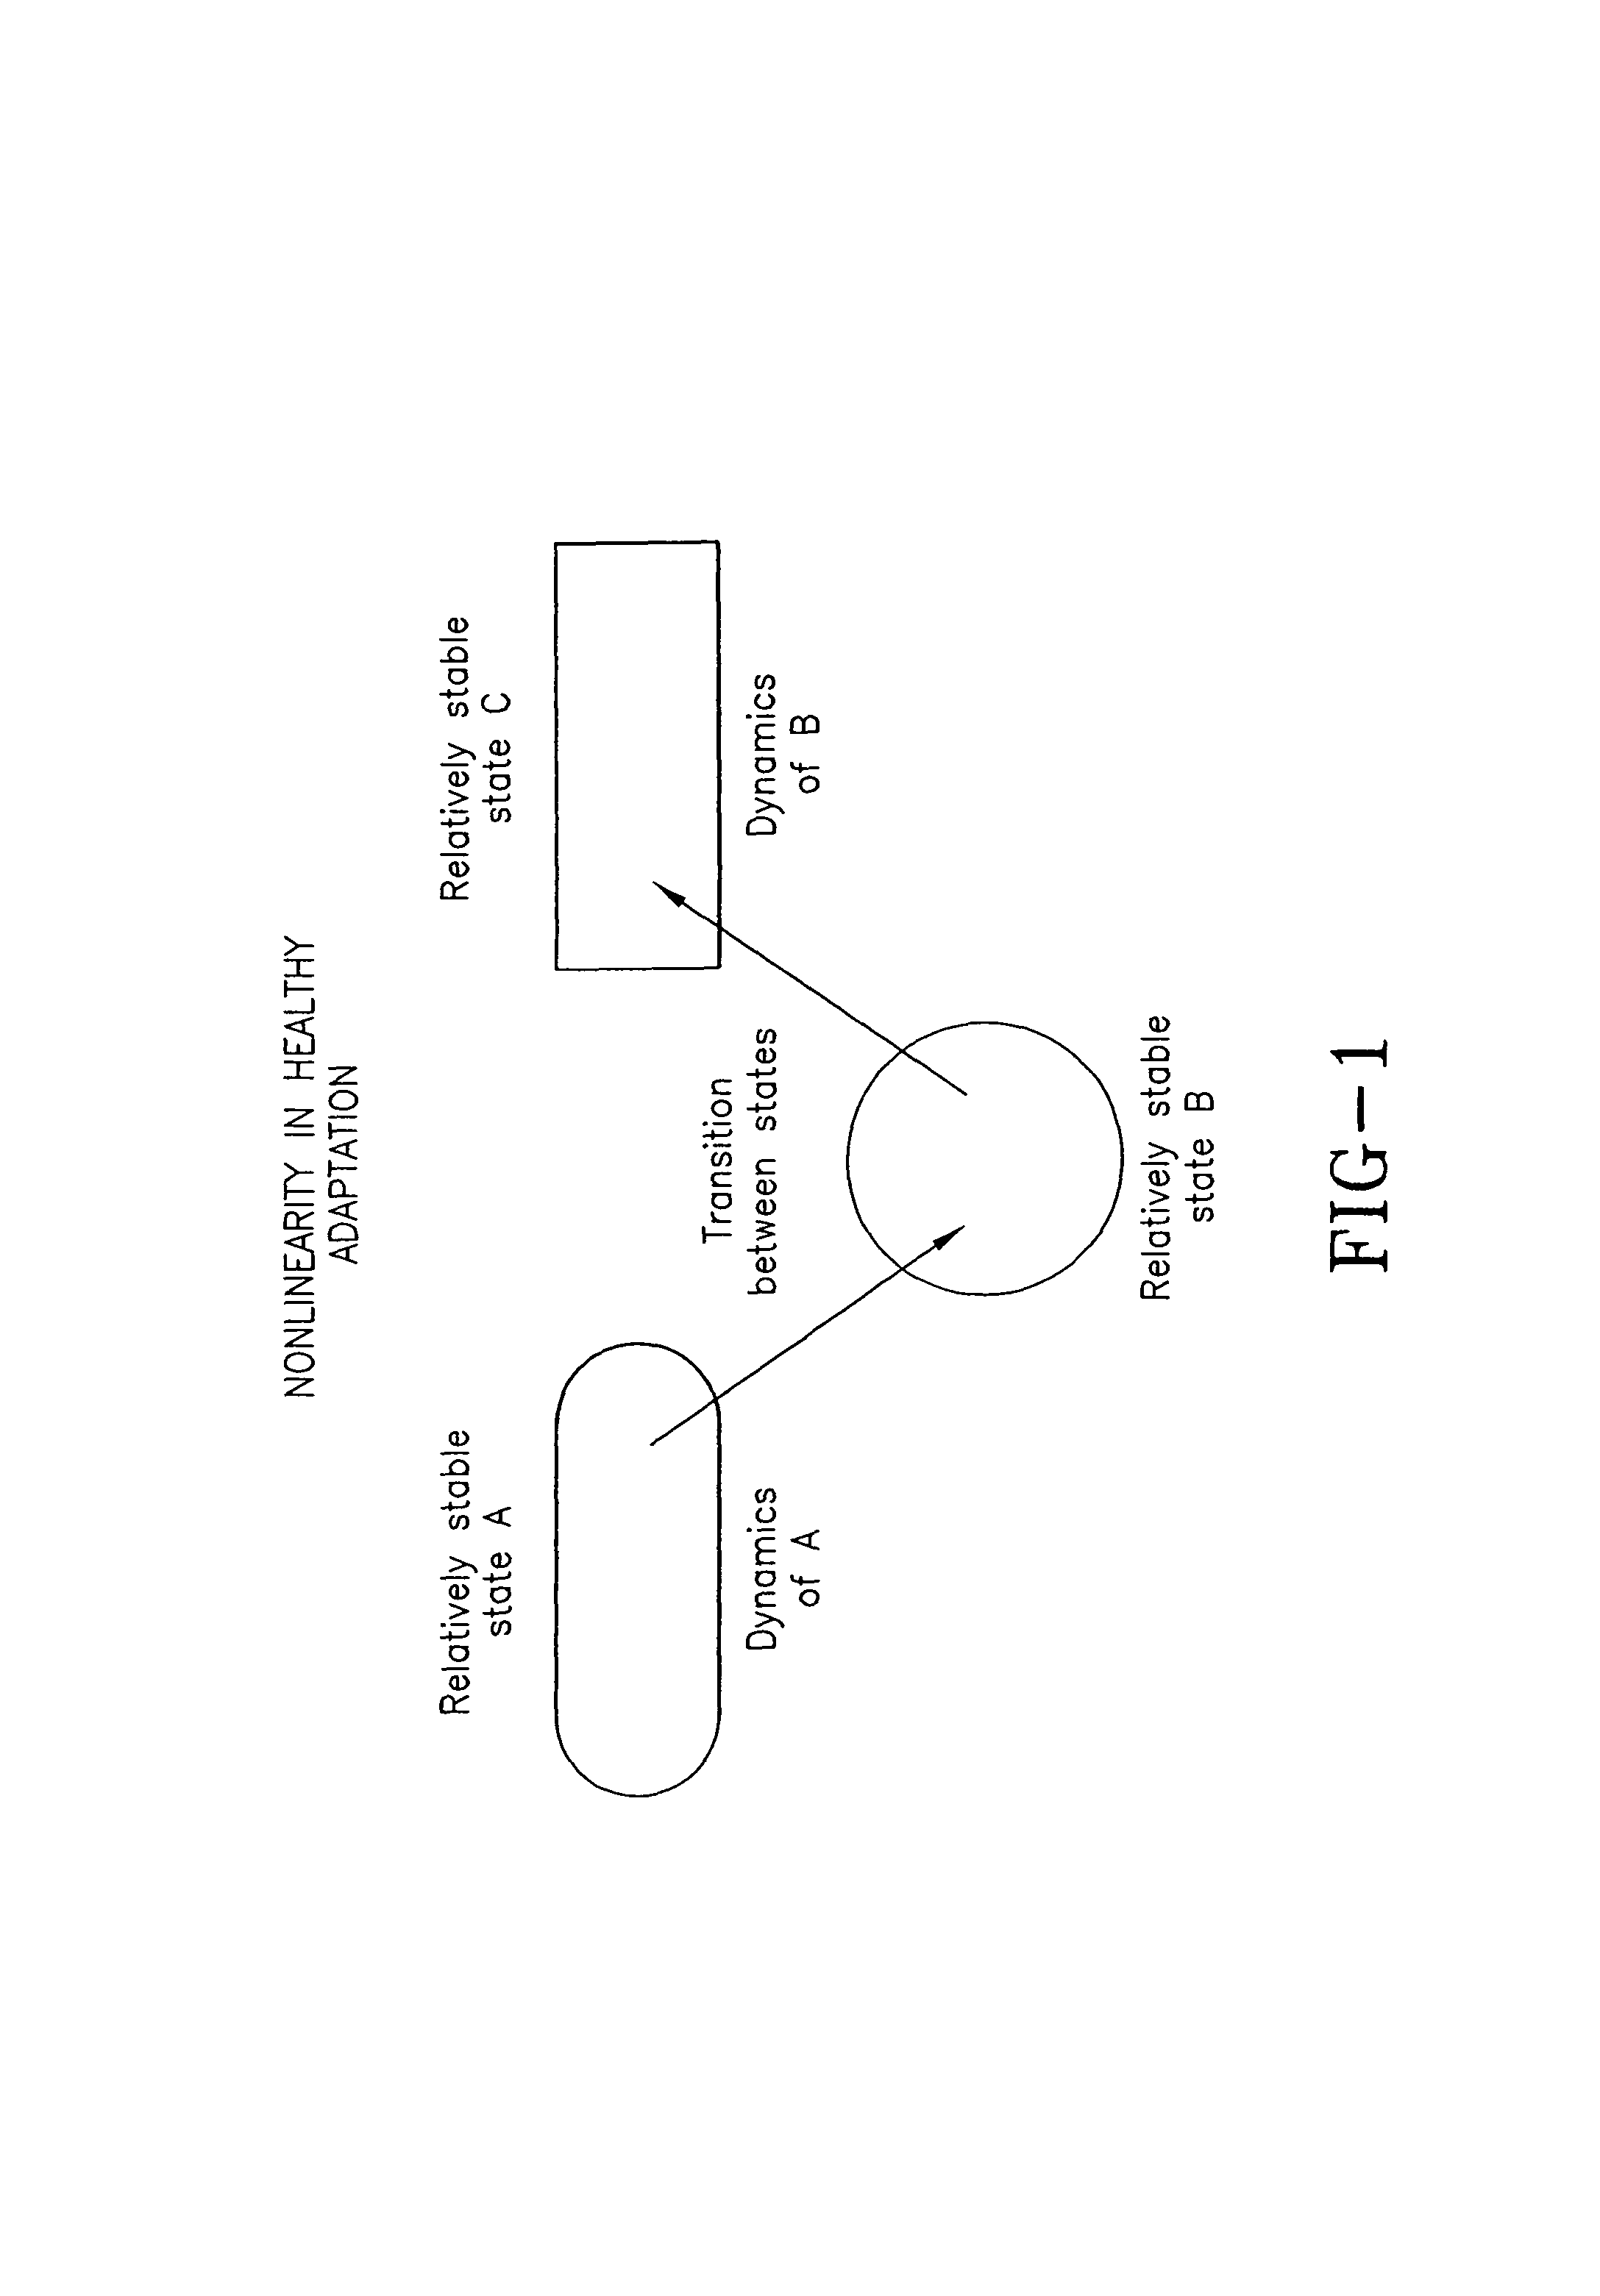 Method and apparatus for analysis of psychiatric and physical conditions